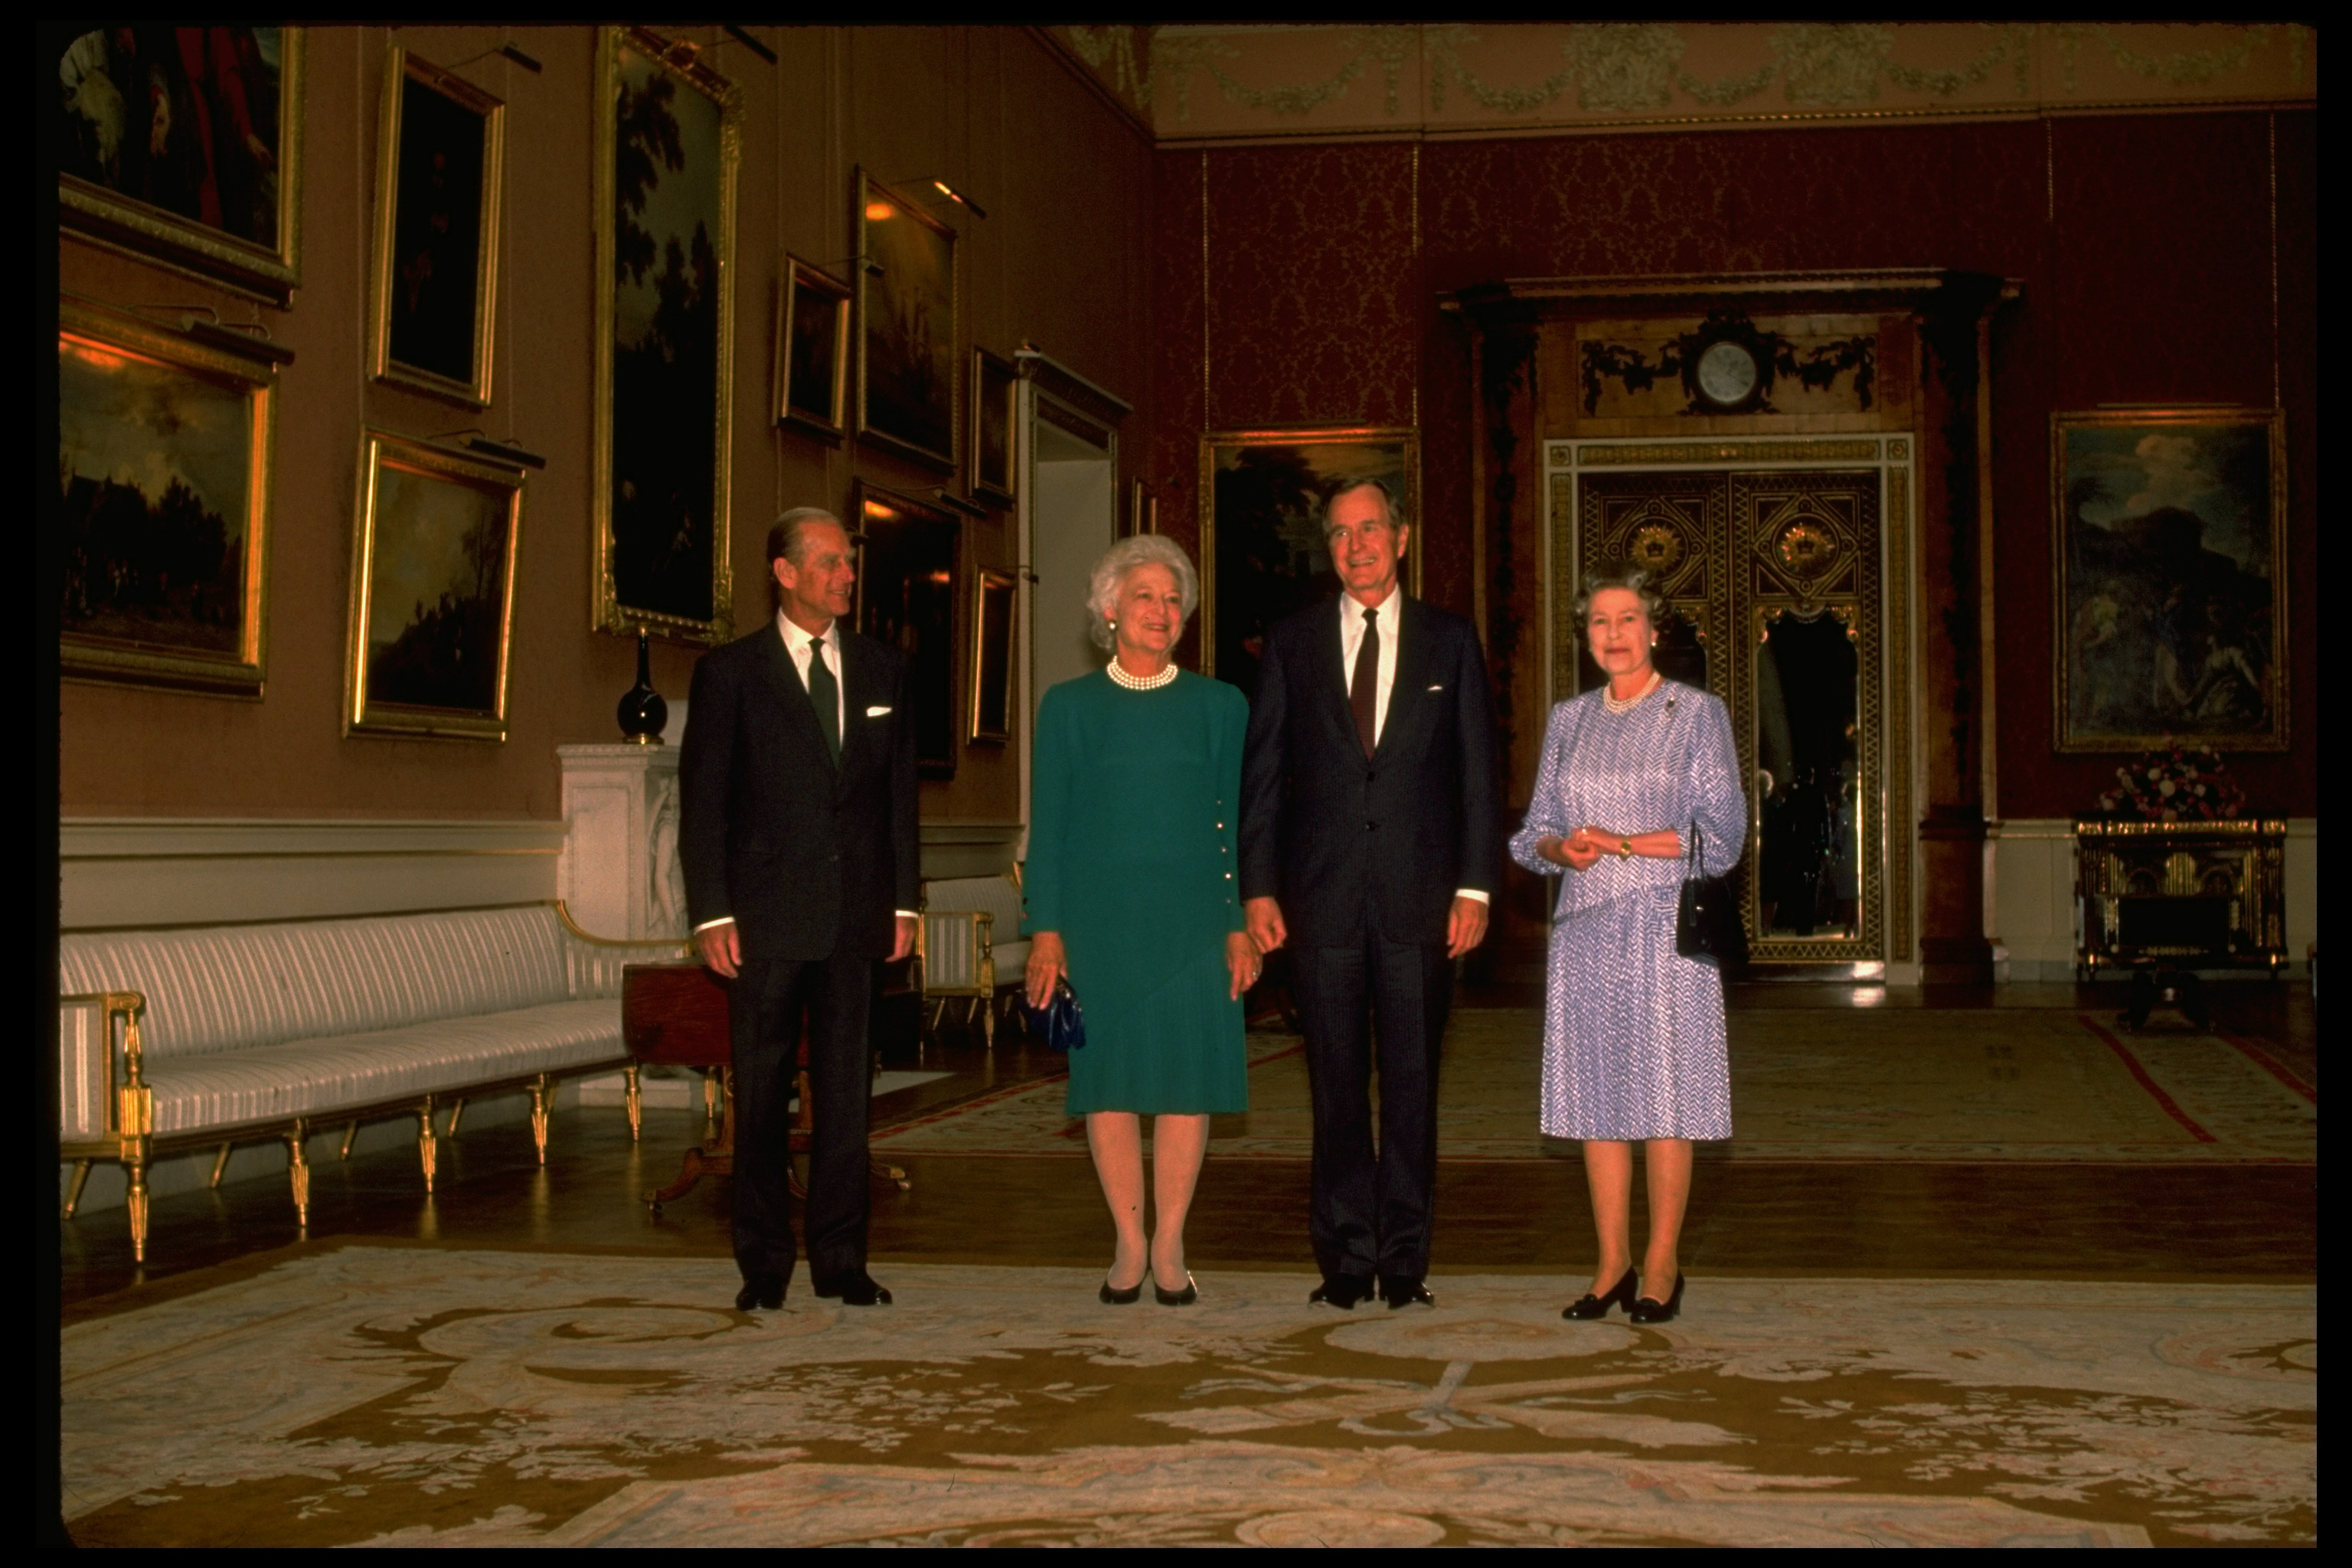 President George H. W. Bush and signature-pearls-sporting Barbara Bush with. Queen Elizabeth II &amp; Prince Philip, at Buckingham Palace, London, England on June 1, 1989 (Diana Walker/Time &amp; Life Pictures/Getty Images)